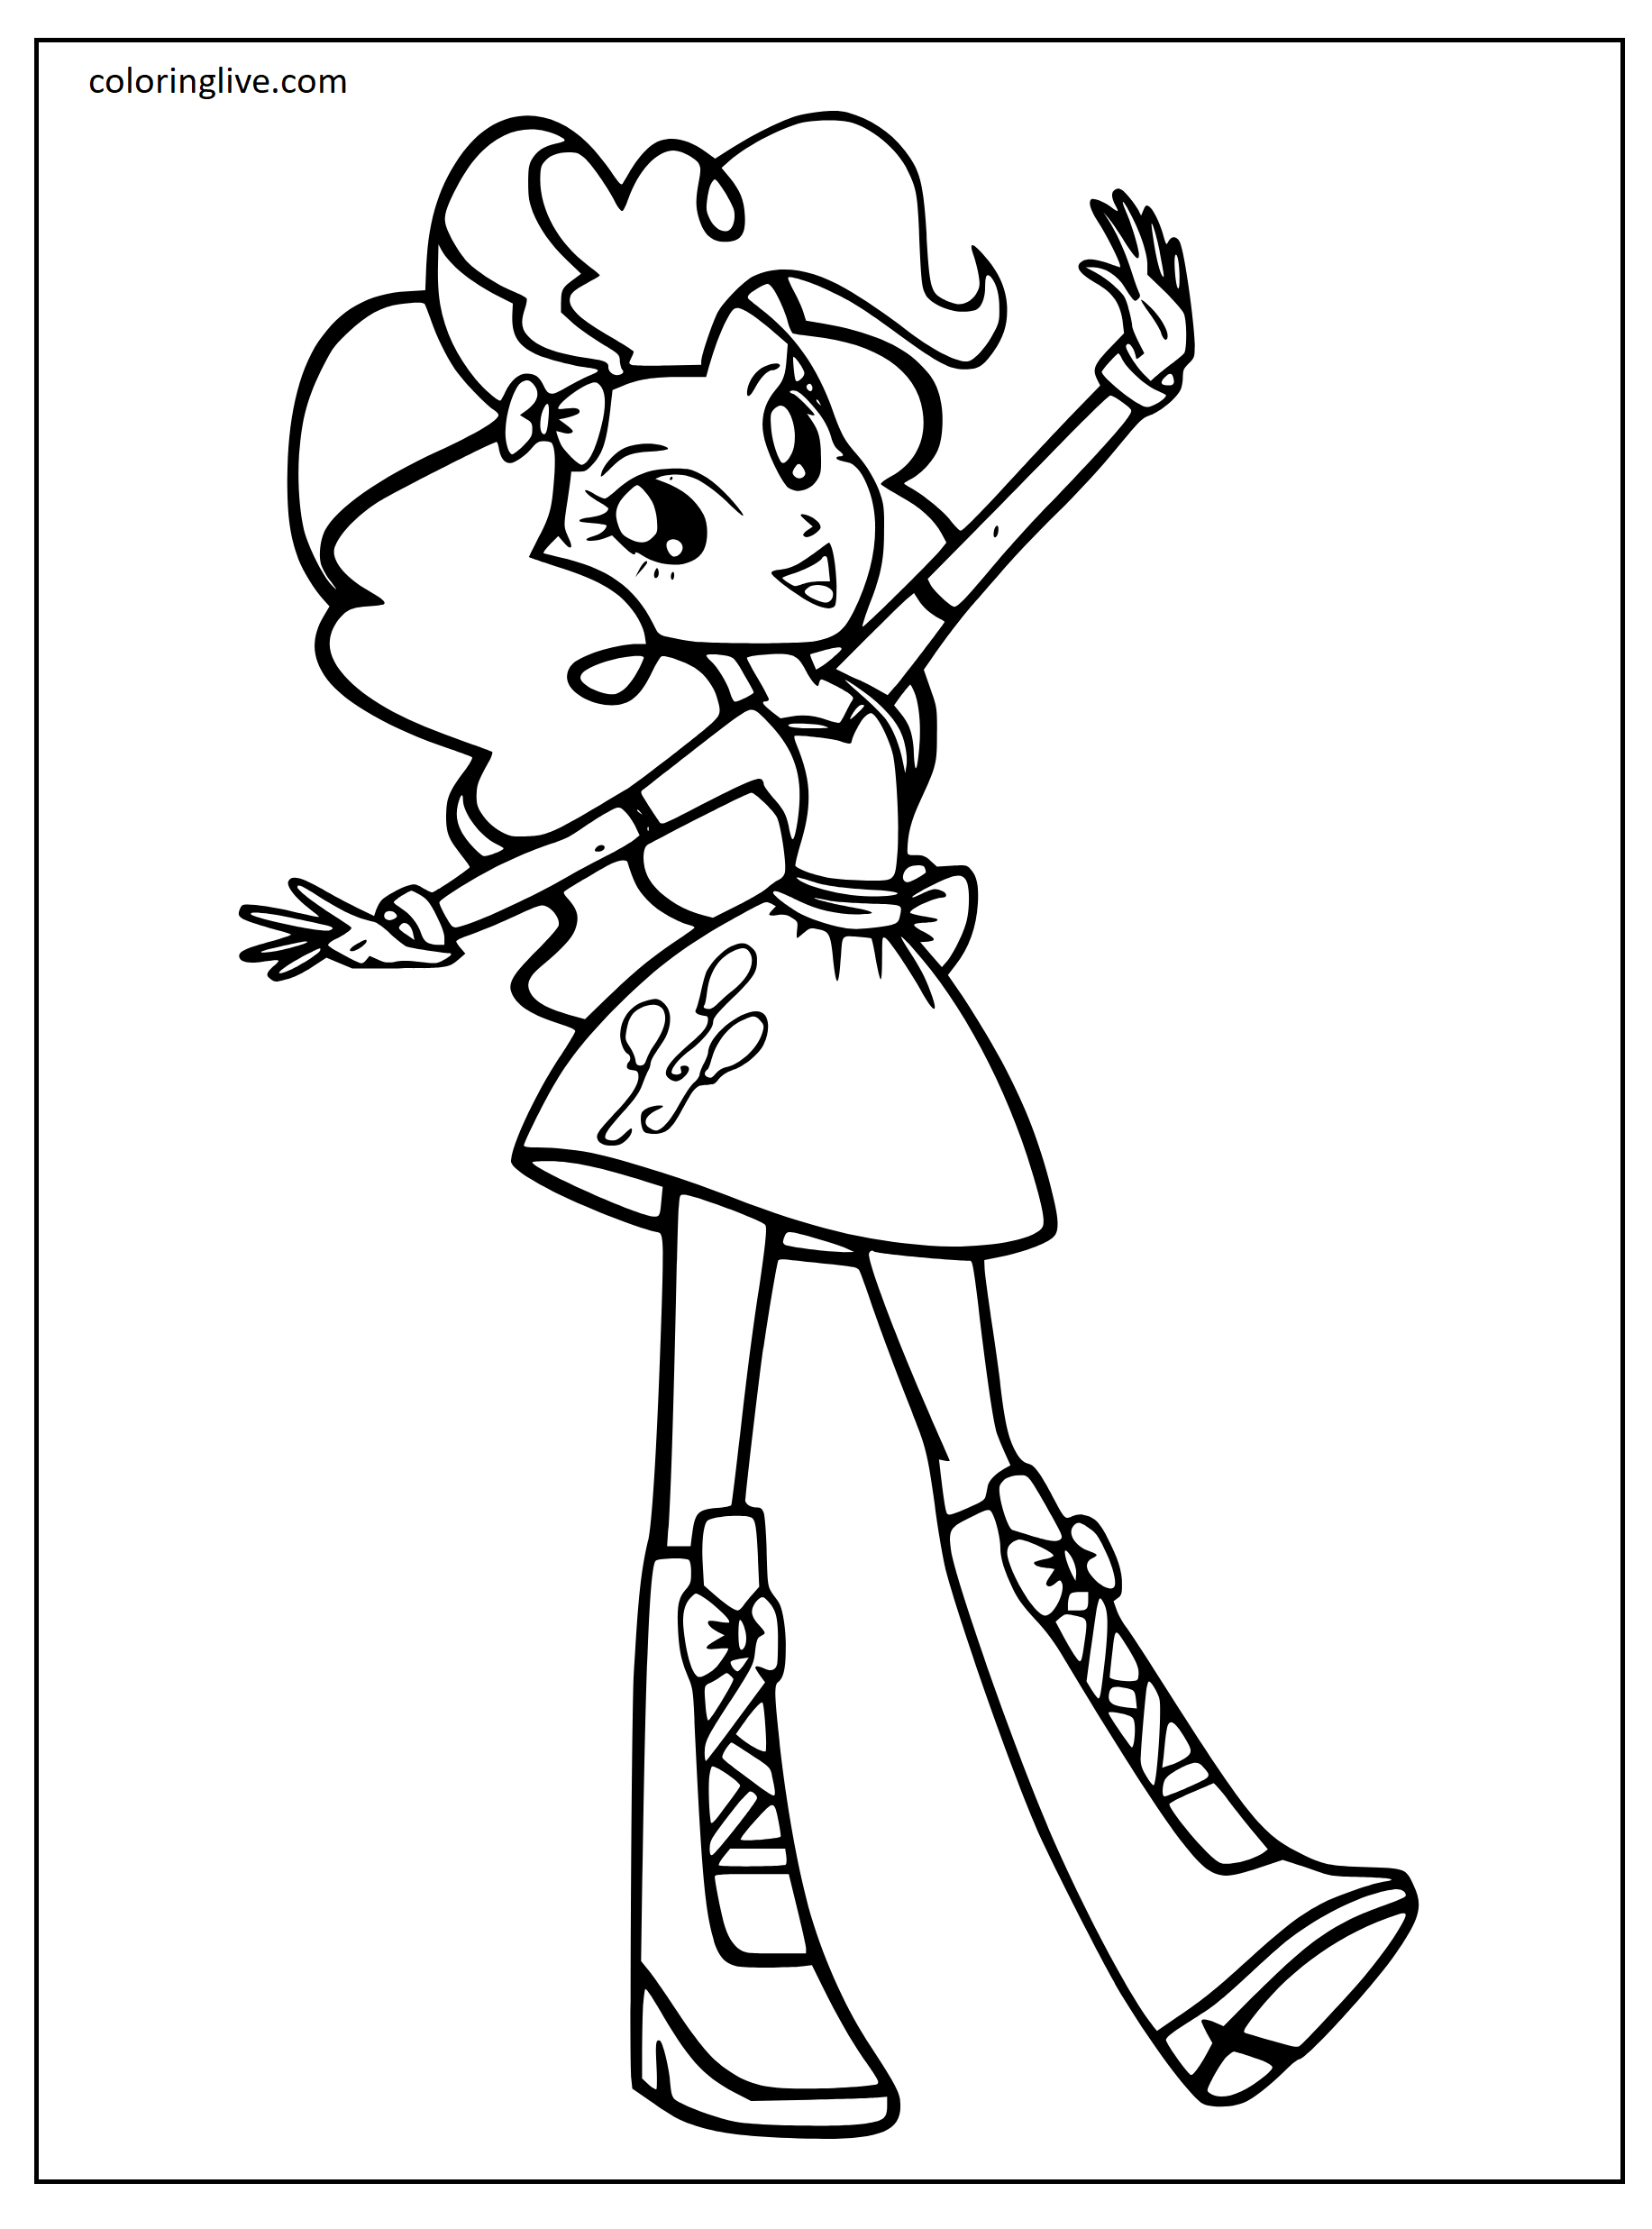 Printable Pinkie Pie Coloring Page for kids.